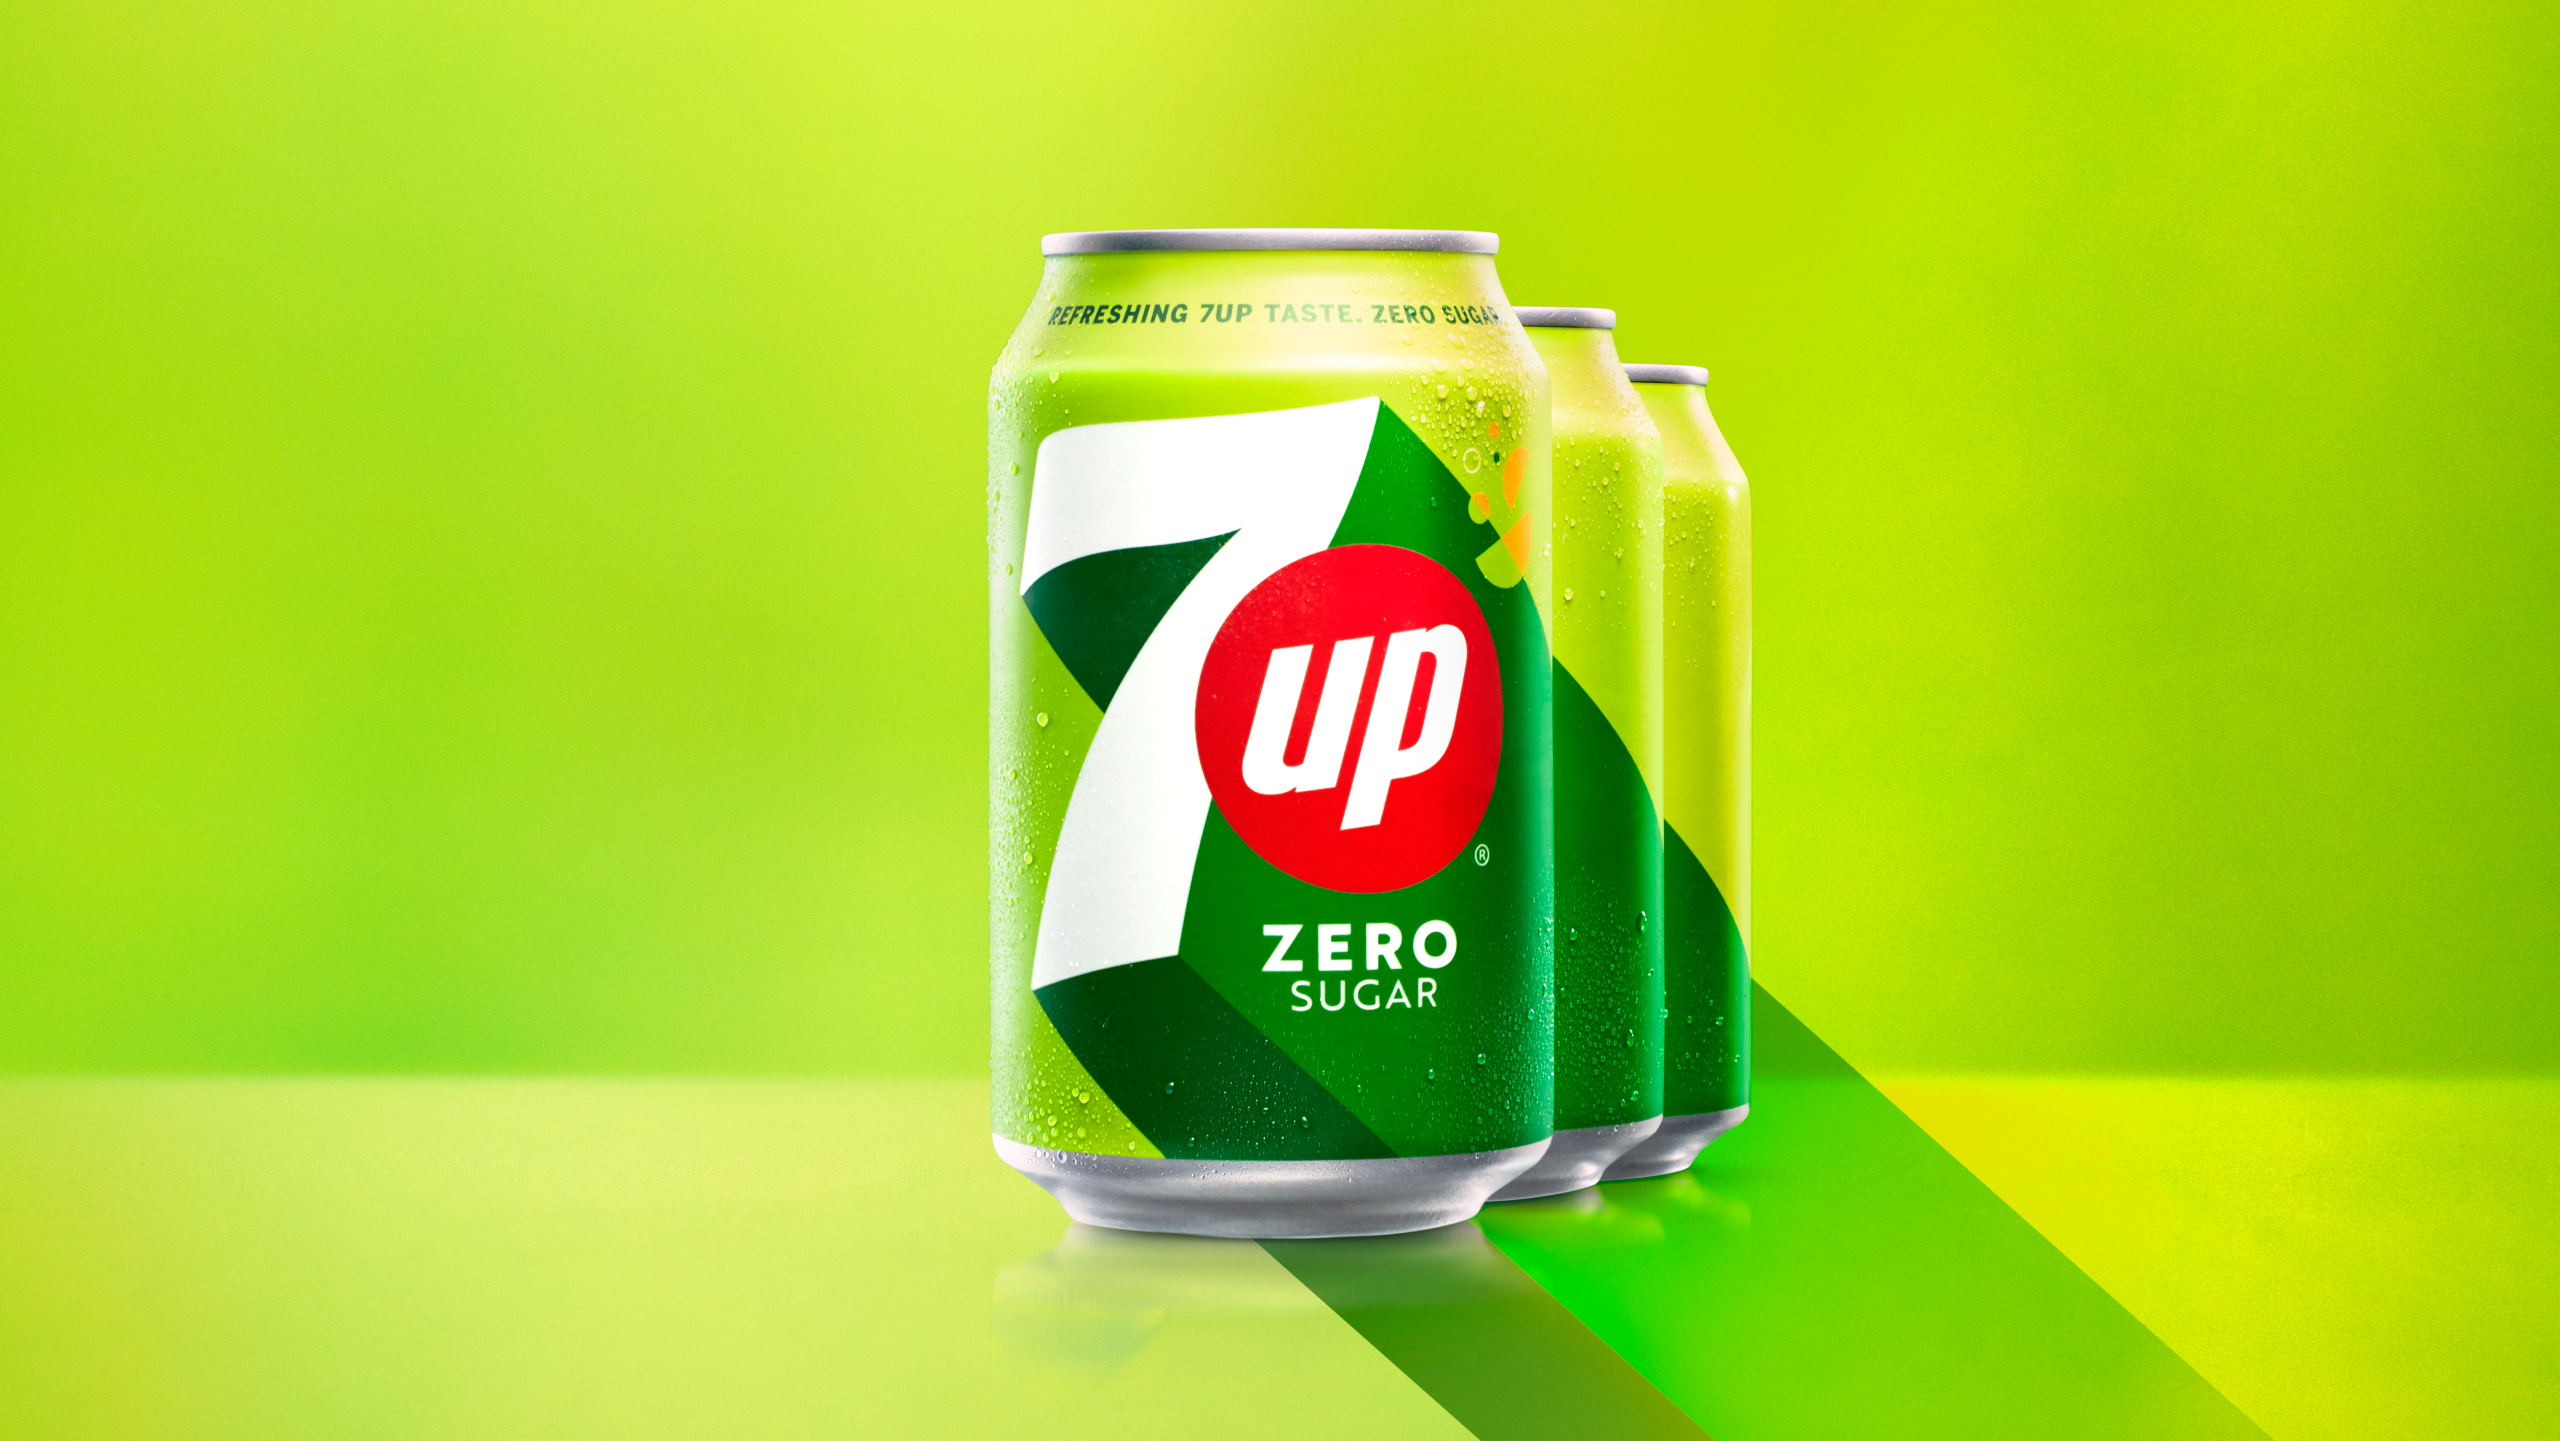 7UP gets visual overhaul and refreshed brand identity